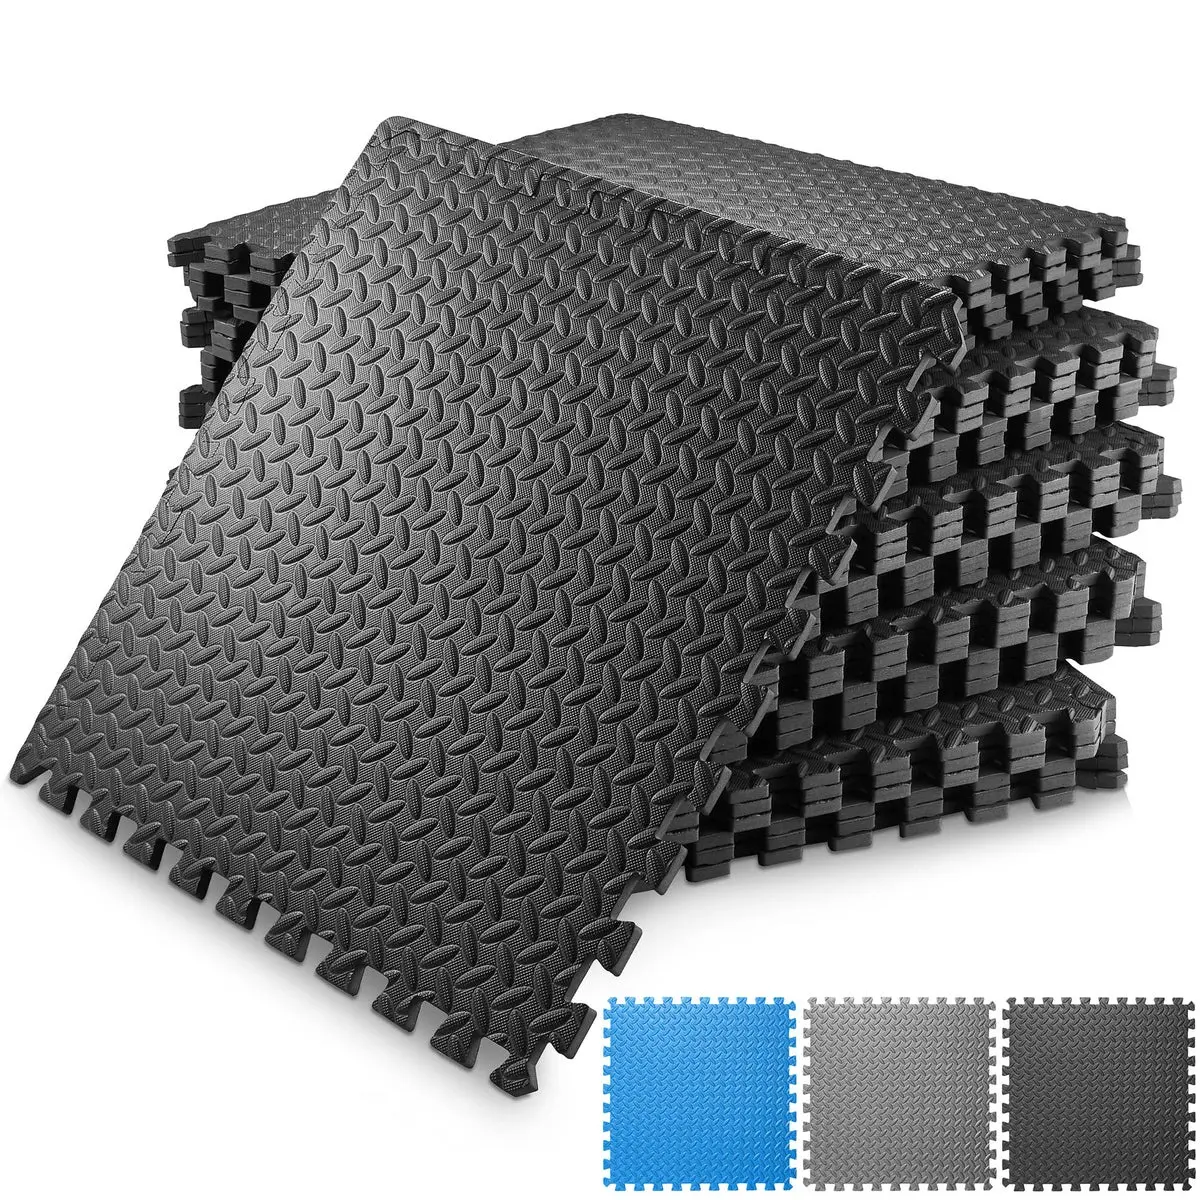 Sansd Wholesale Puzzle Exercise Mat Premium Eva Foam Tiles Protective Flooring For Gym Equipment And Cushions For Workouts